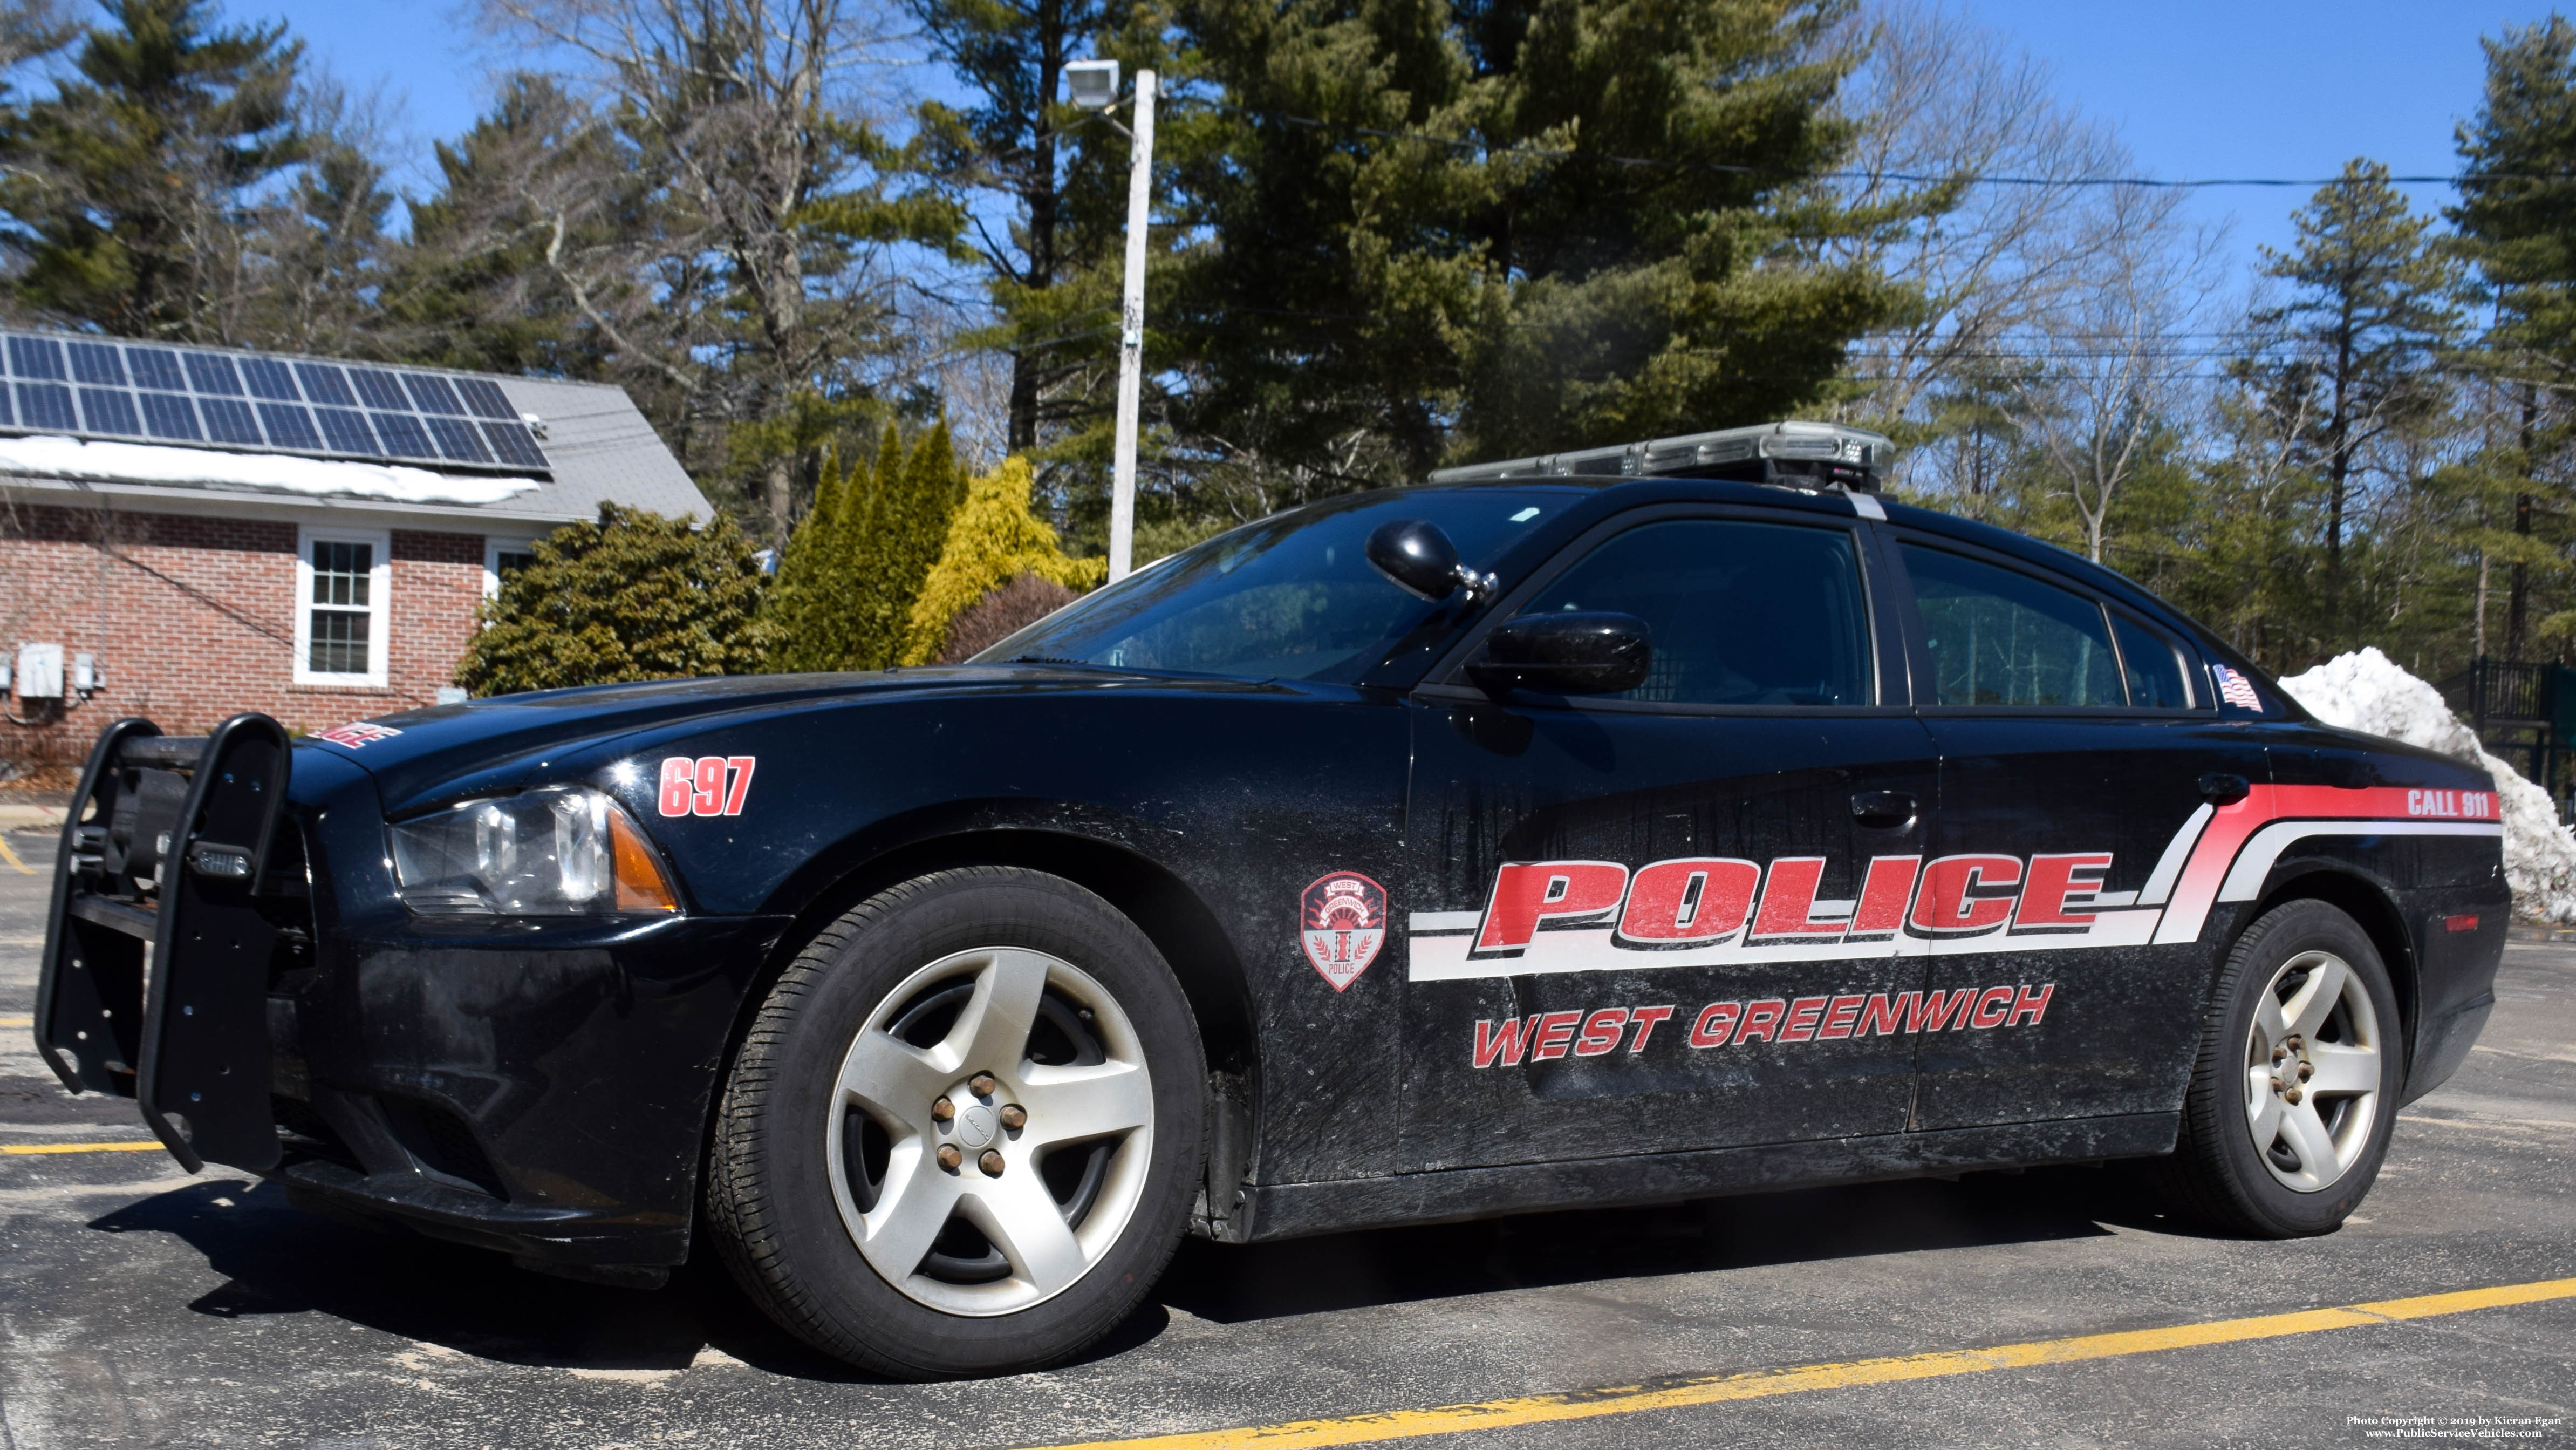 A photo  of West Greenwich Police
            Cruiser 697, a 2013 Dodge Charger             taken by Kieran Egan